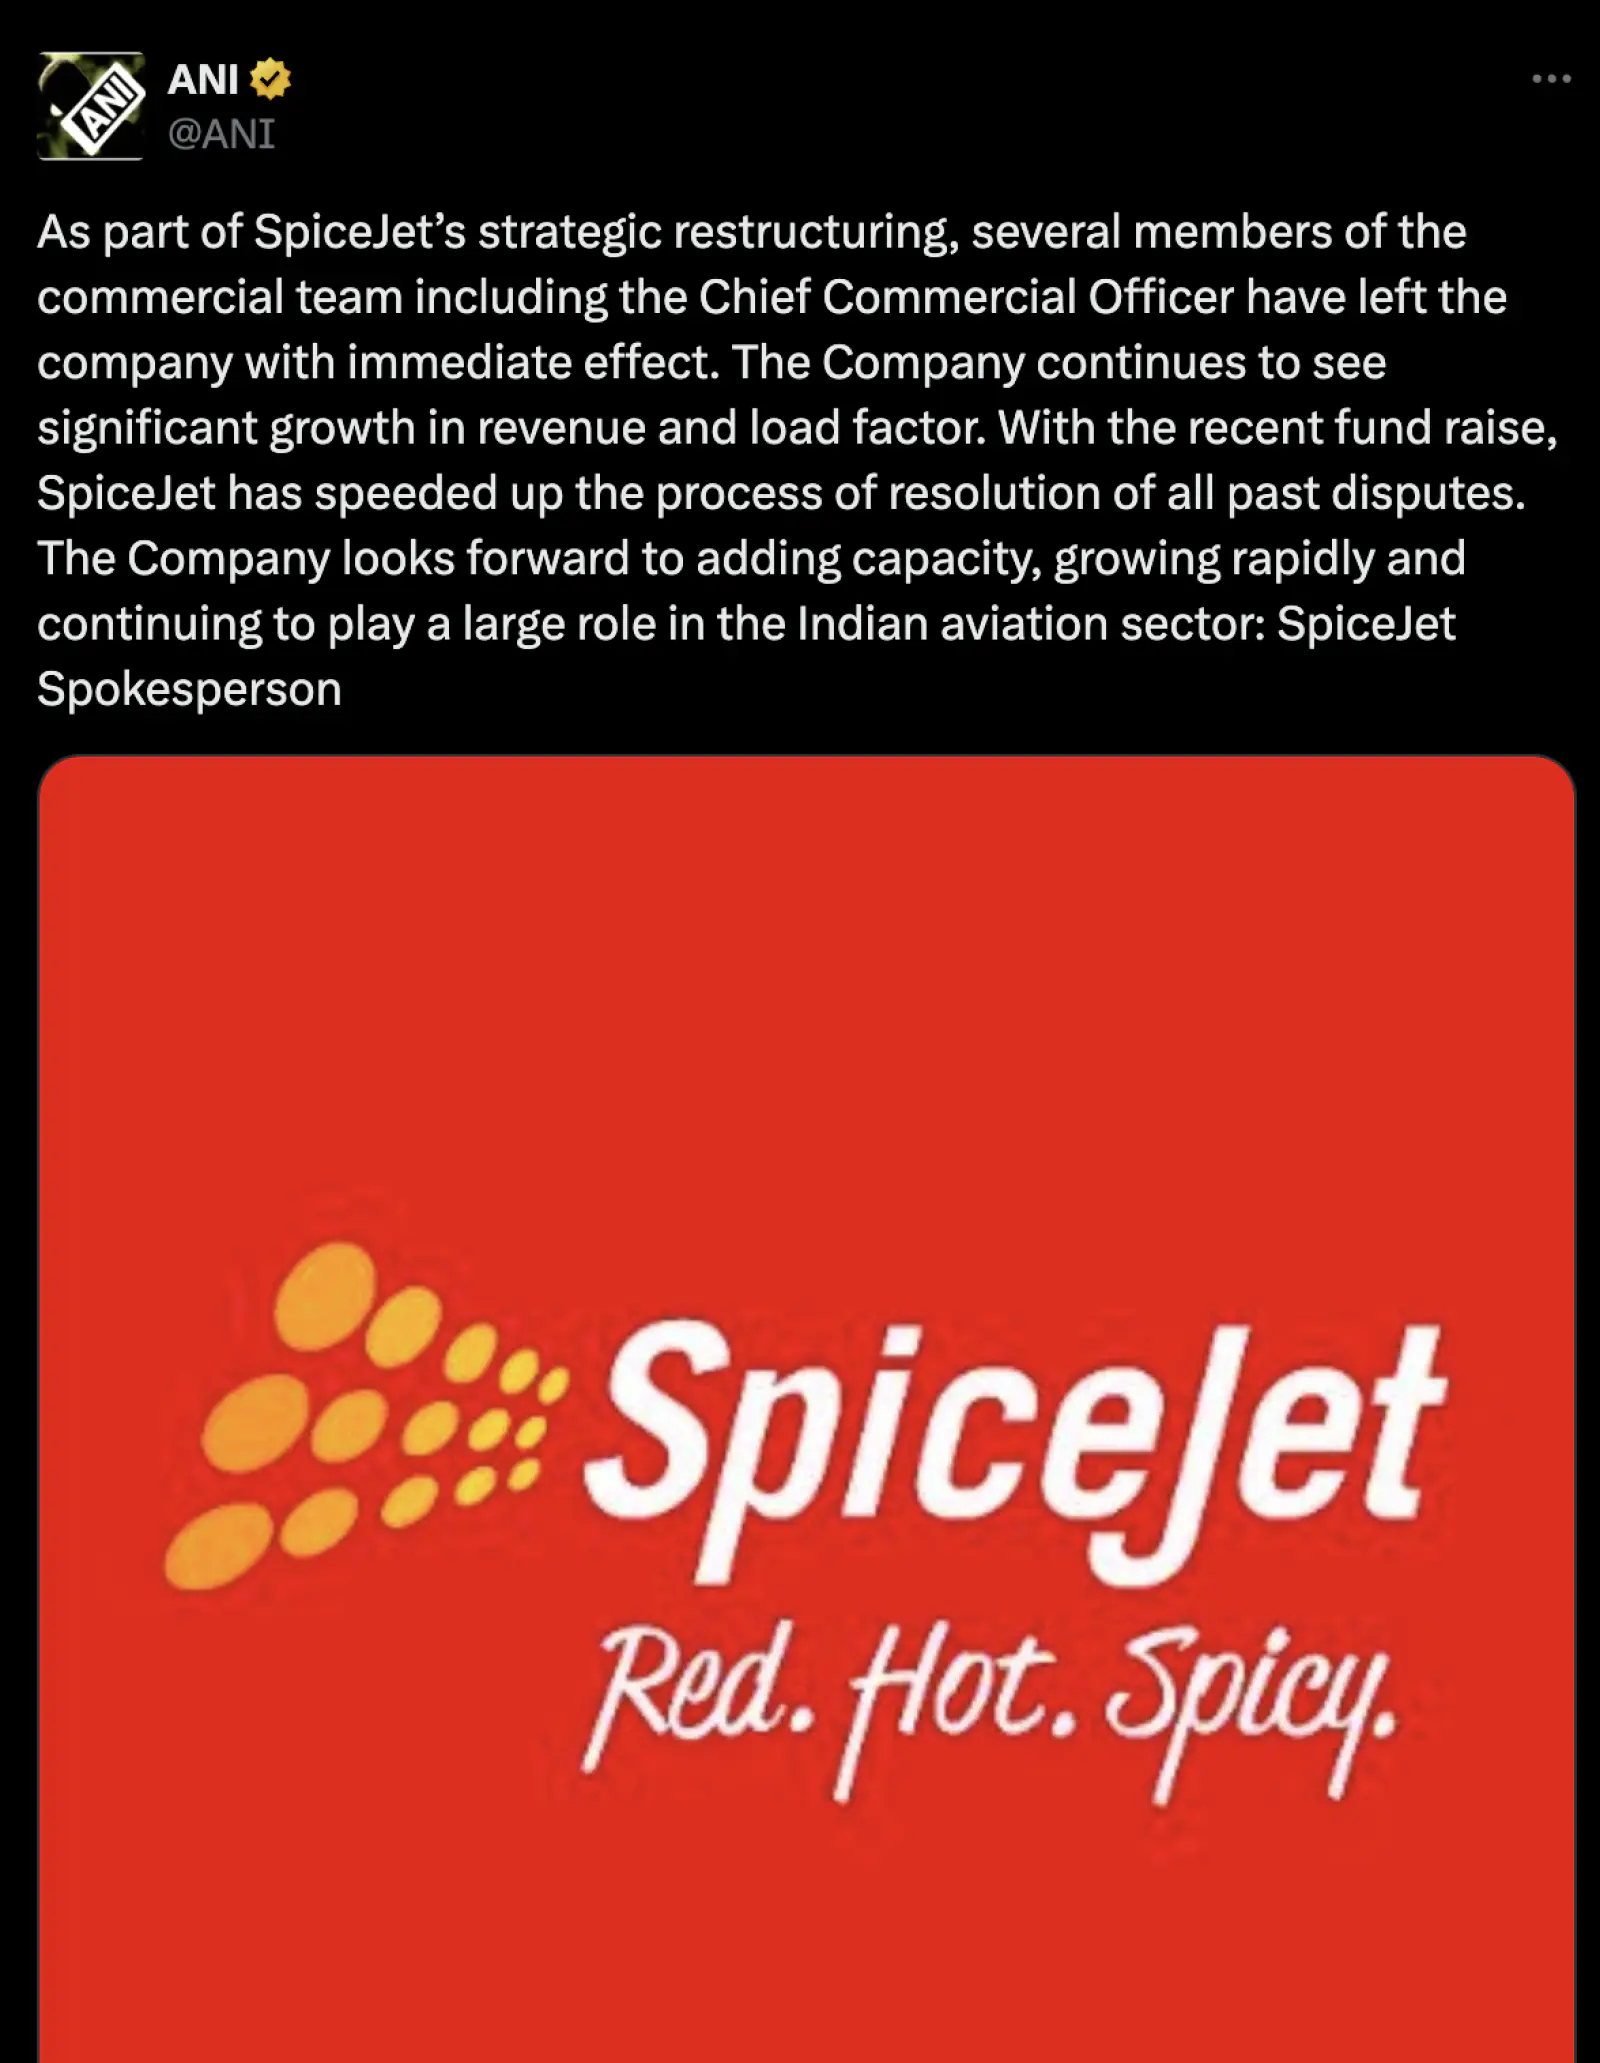 Many people including SpiceJet's Chief Commercial Officer left the company, the company said this